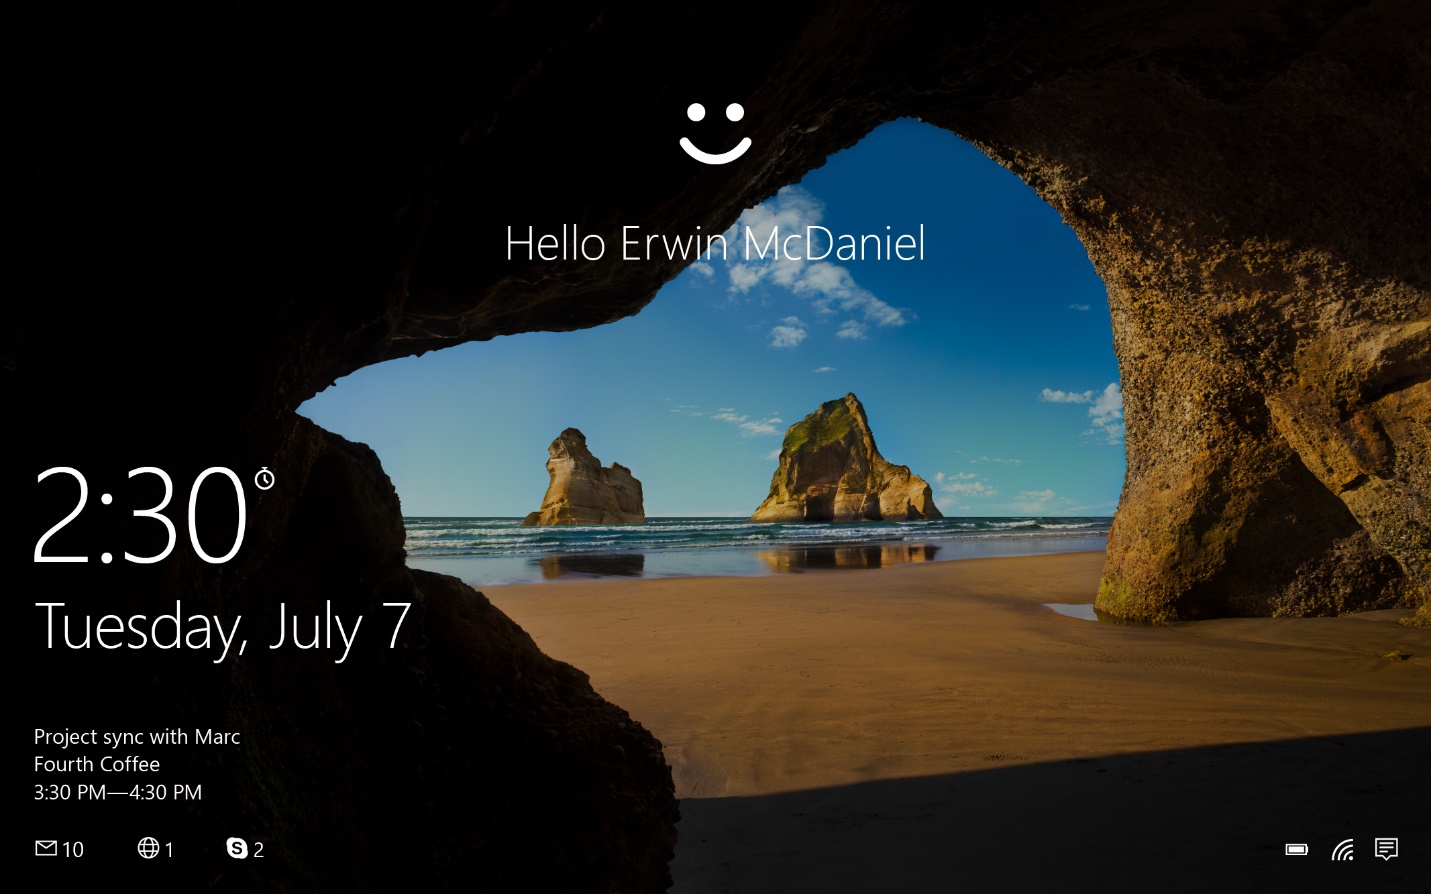 Example of a user sign-in with Windows Hello for Business